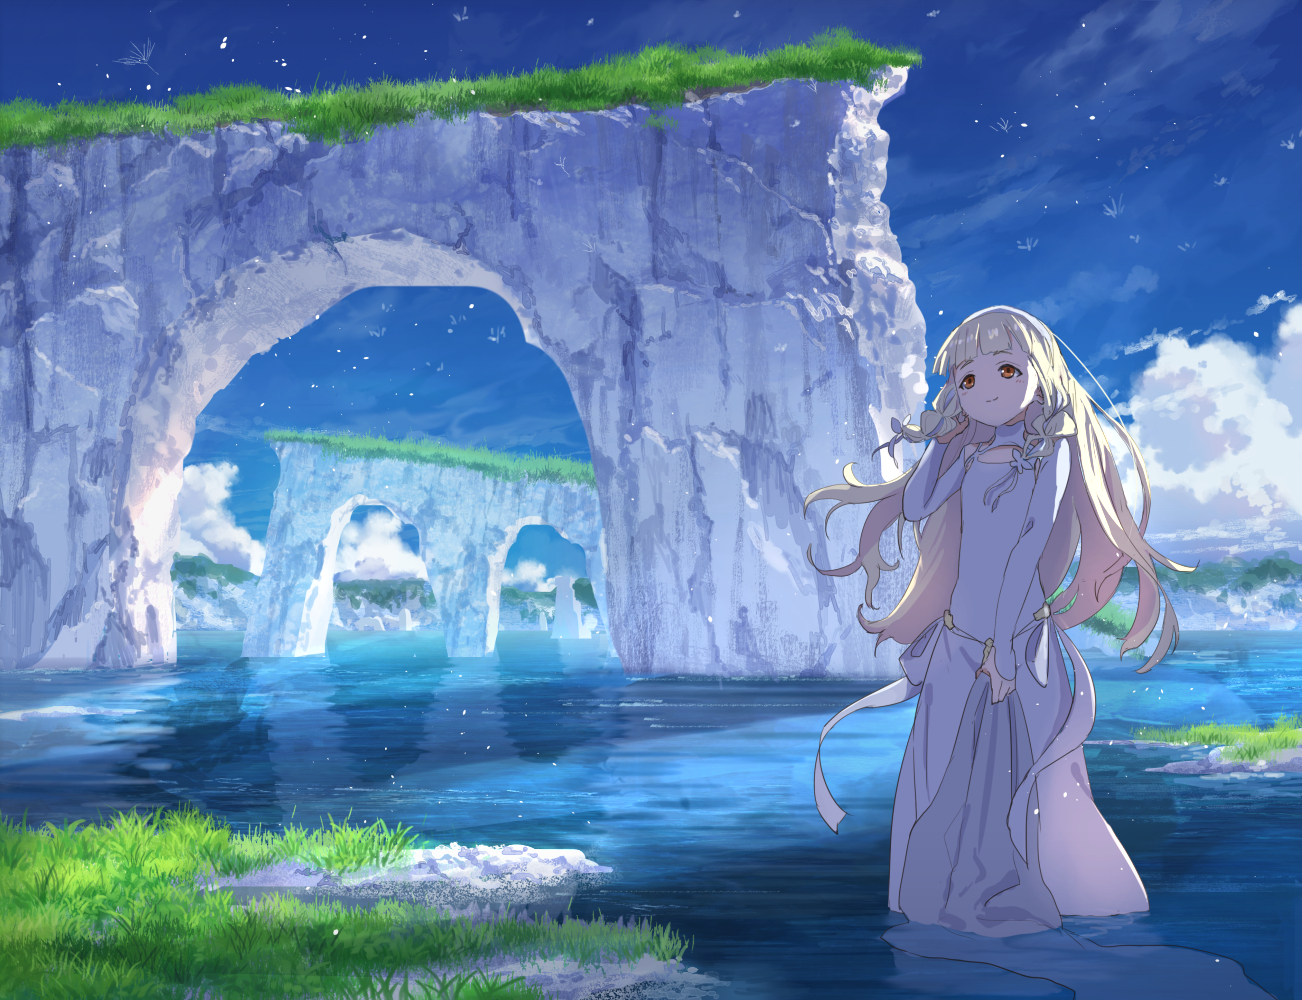 Anime 1302x1000 Maquia: When the Promised Flower Blooms anime girls rocks standing in water anime dress long hair women outdoors outdoors Maquia